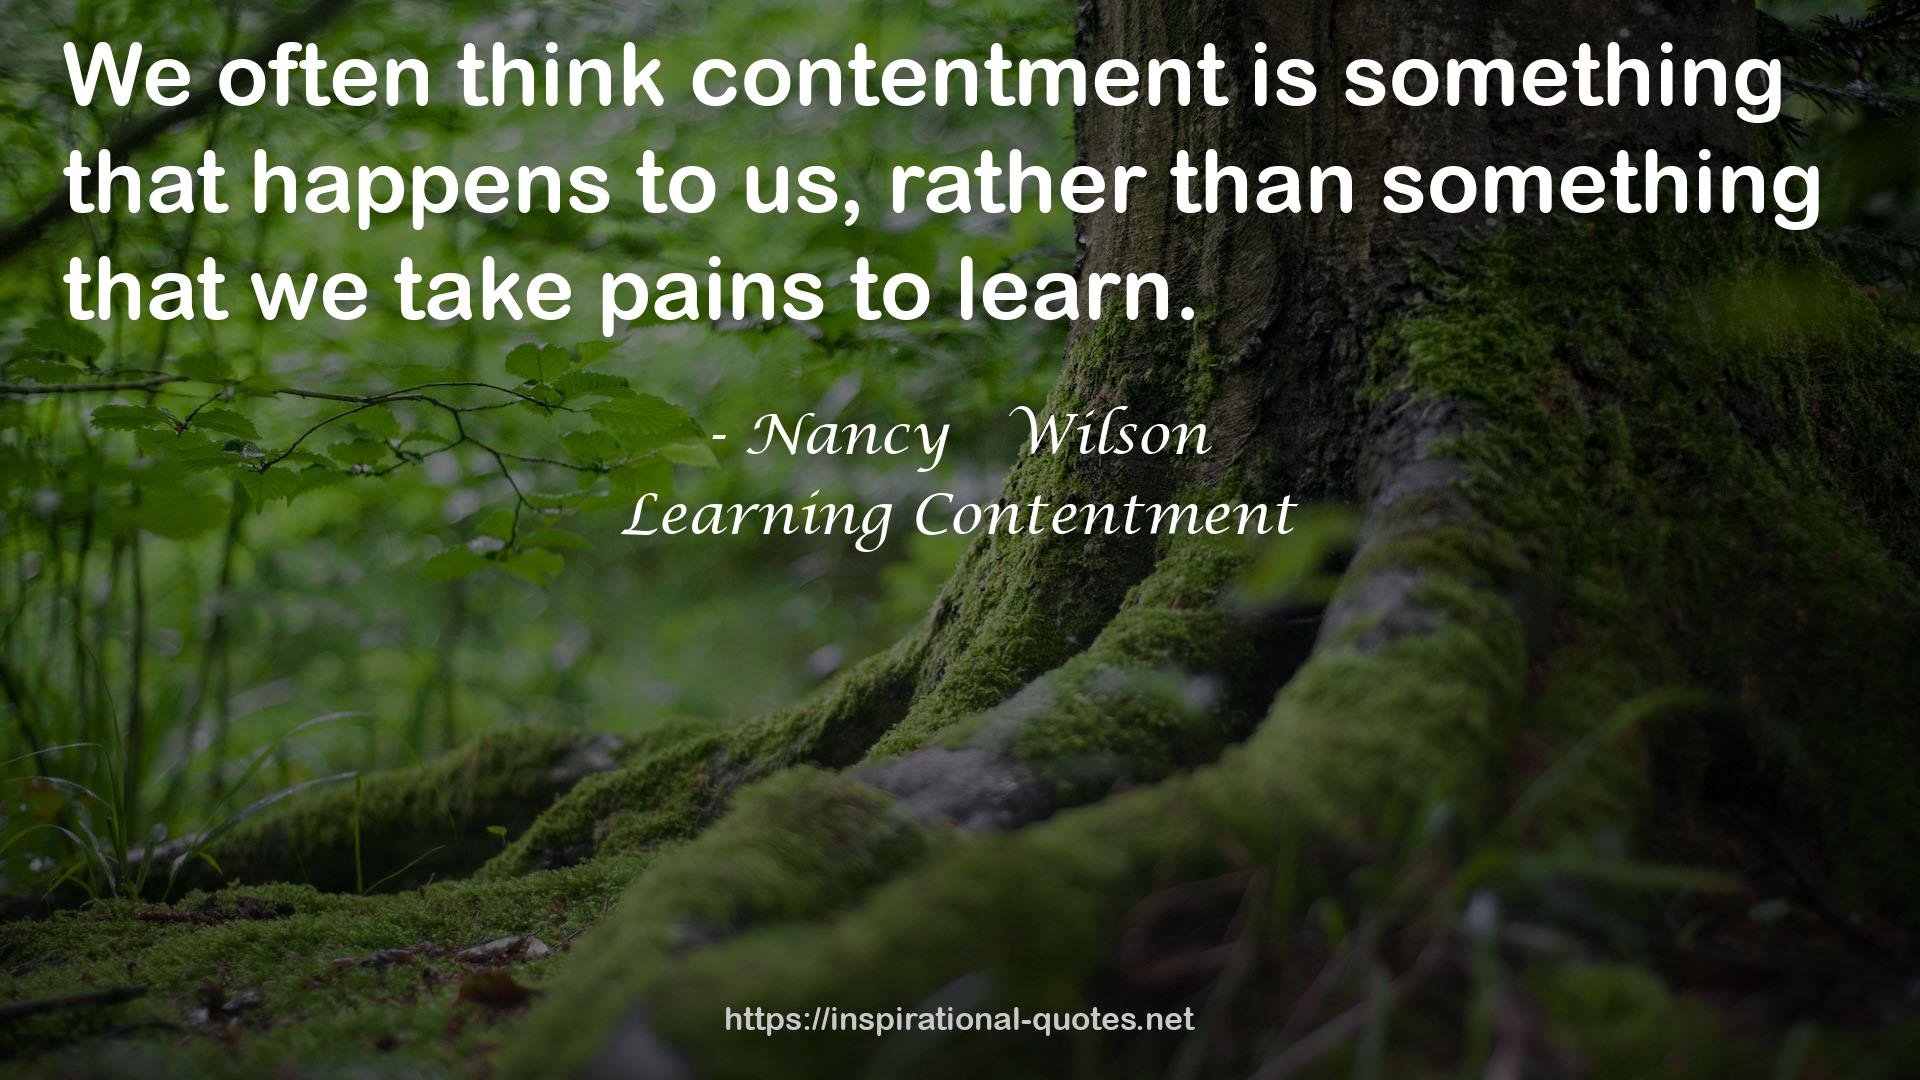 Learning Contentment QUOTES